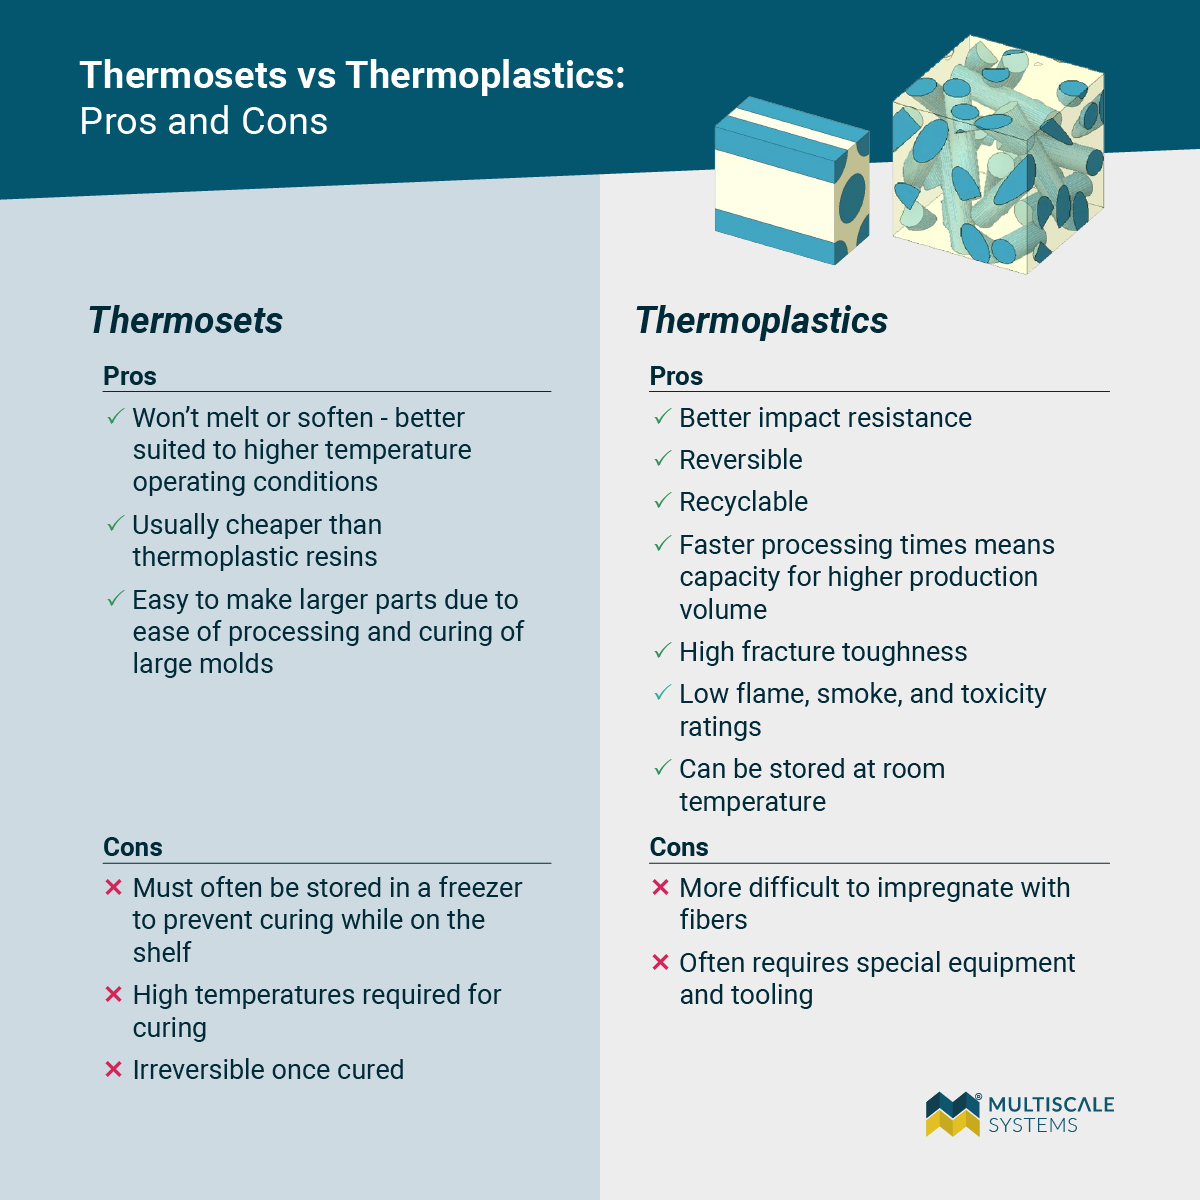 comparing pros and cons of thermosets versus thermoplastics